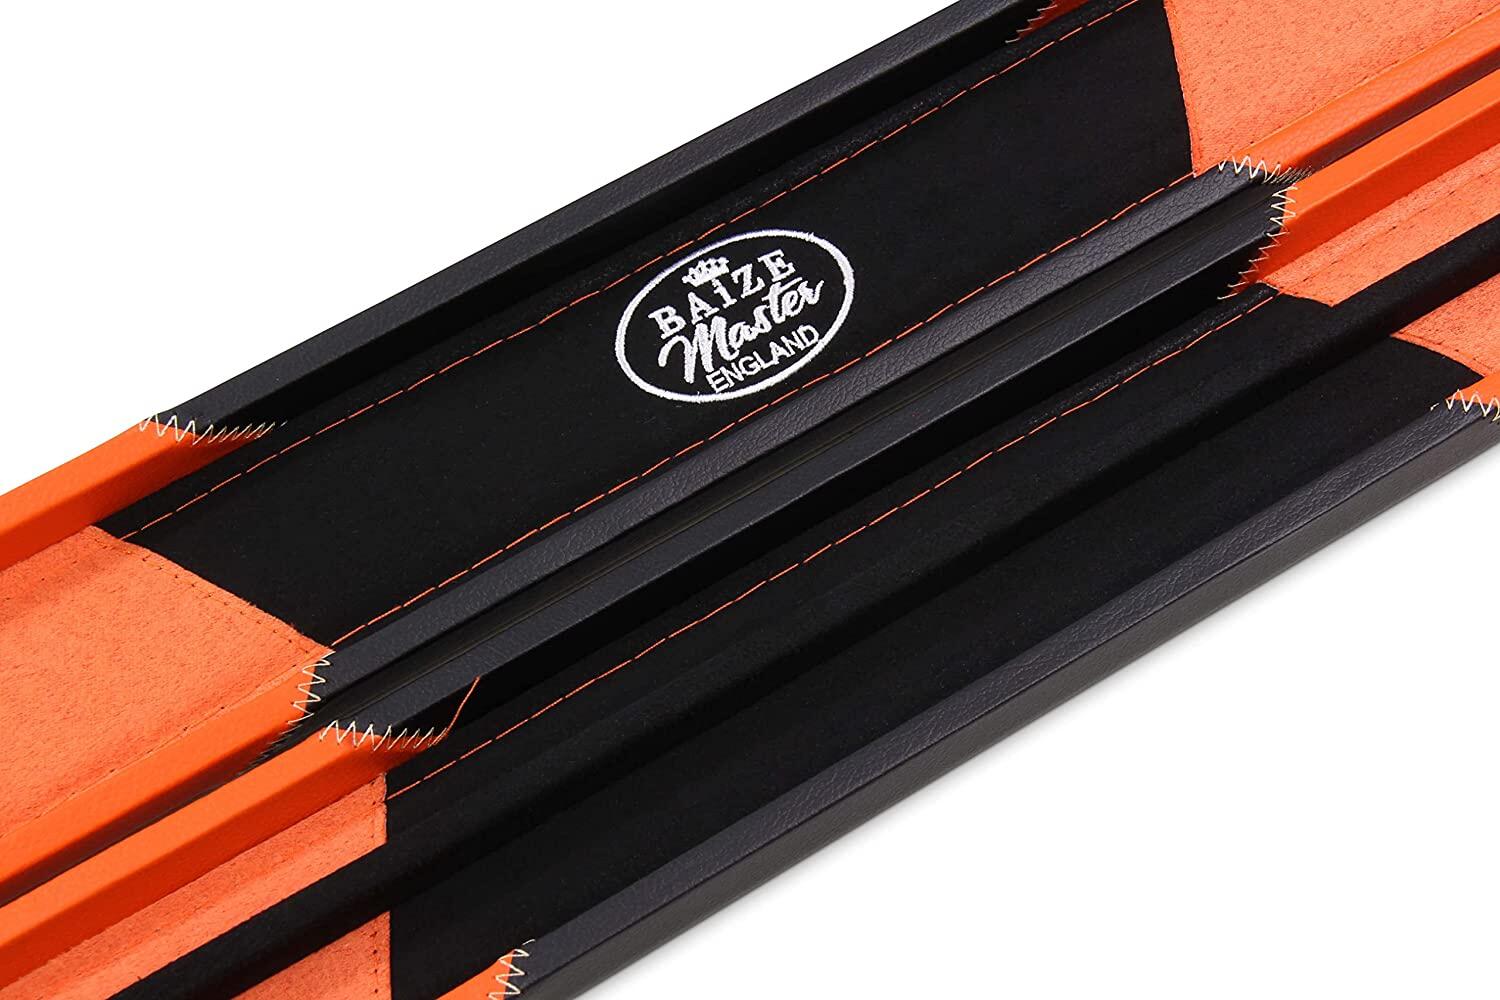 Baize Master ORANGE ARROW 2pc Deluxe Snooker Pool Cue Case with Matching Interi 5/7